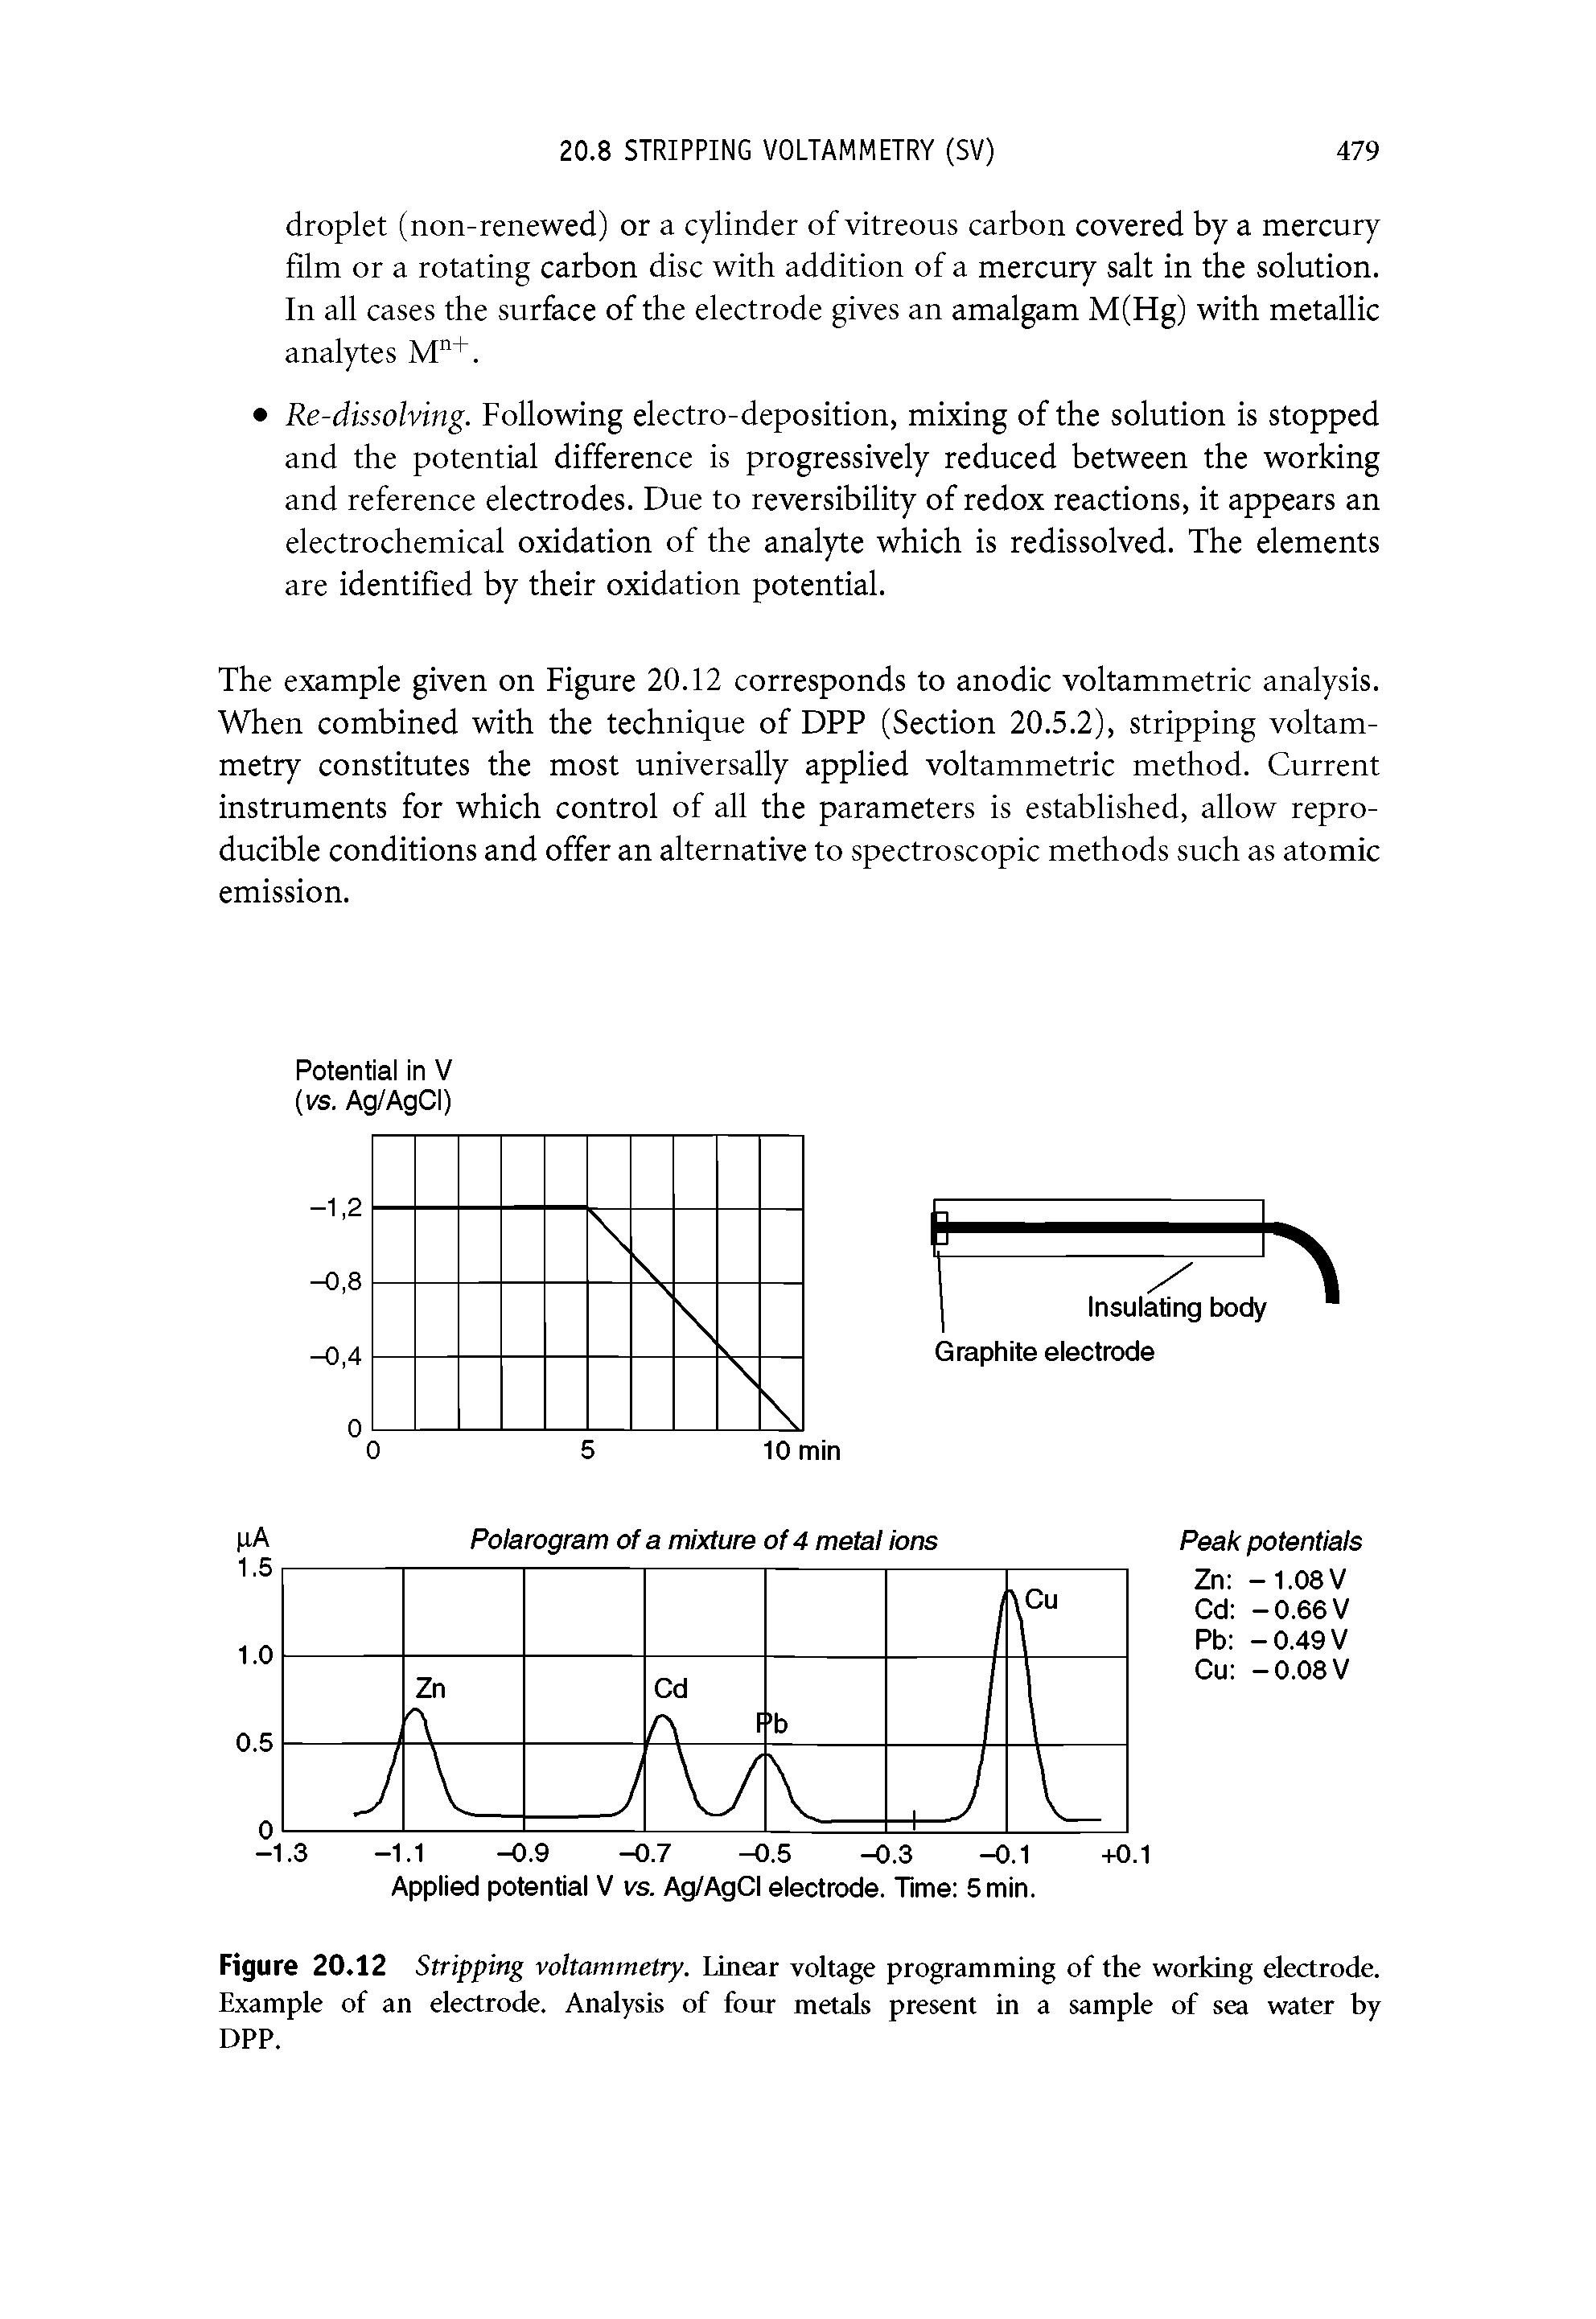 Figure 20.12 Stripping voltammetry. Linear voltage programming of the working electrode. Example of an electrode. Analysis of four metals present in a sample of sea water by DPP.